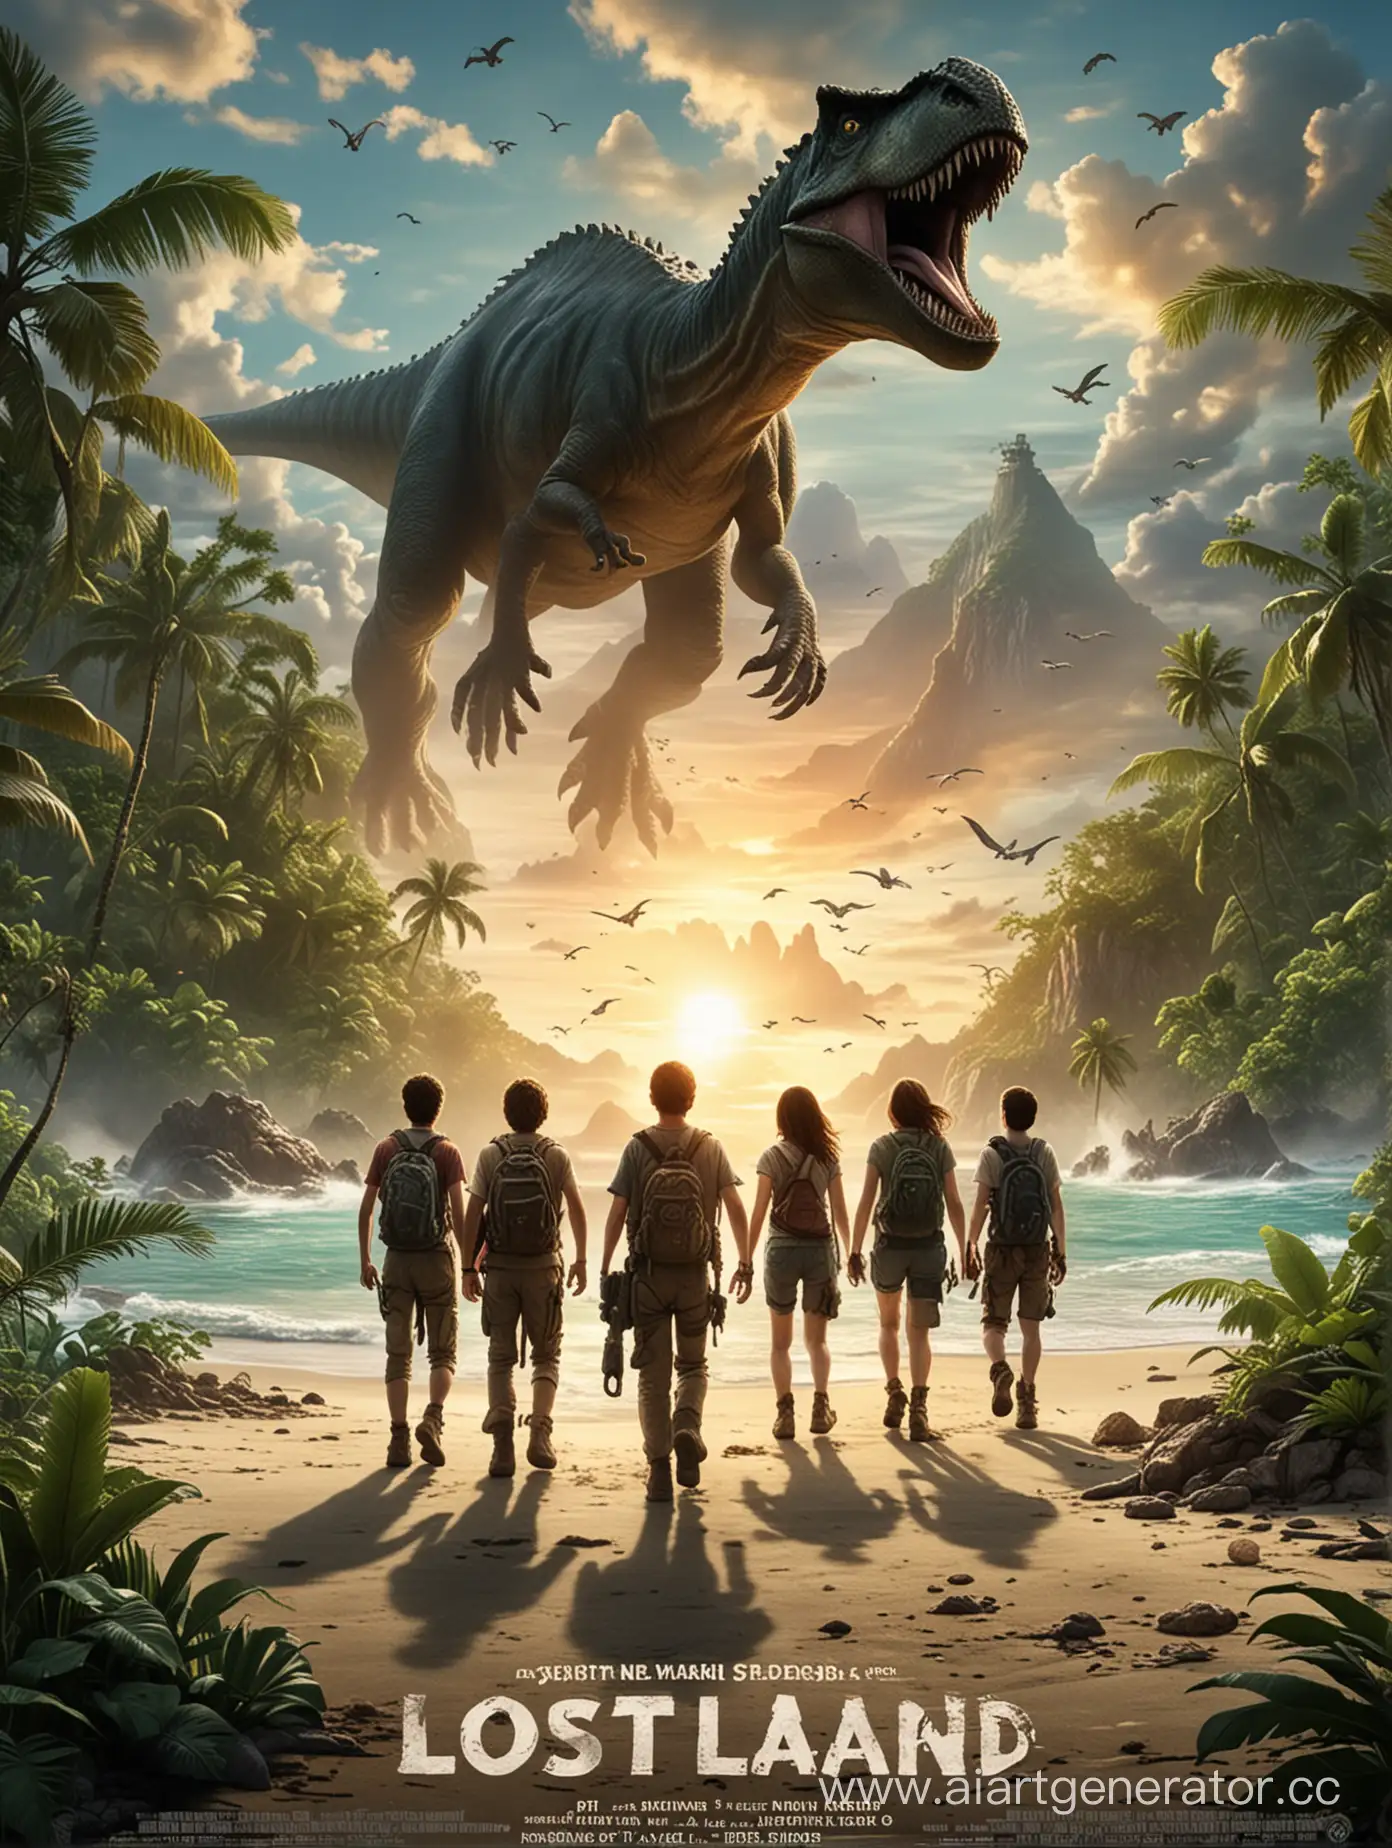 Teenagers-Surviving-on-a-Lost-Island-with-Dinosaurs